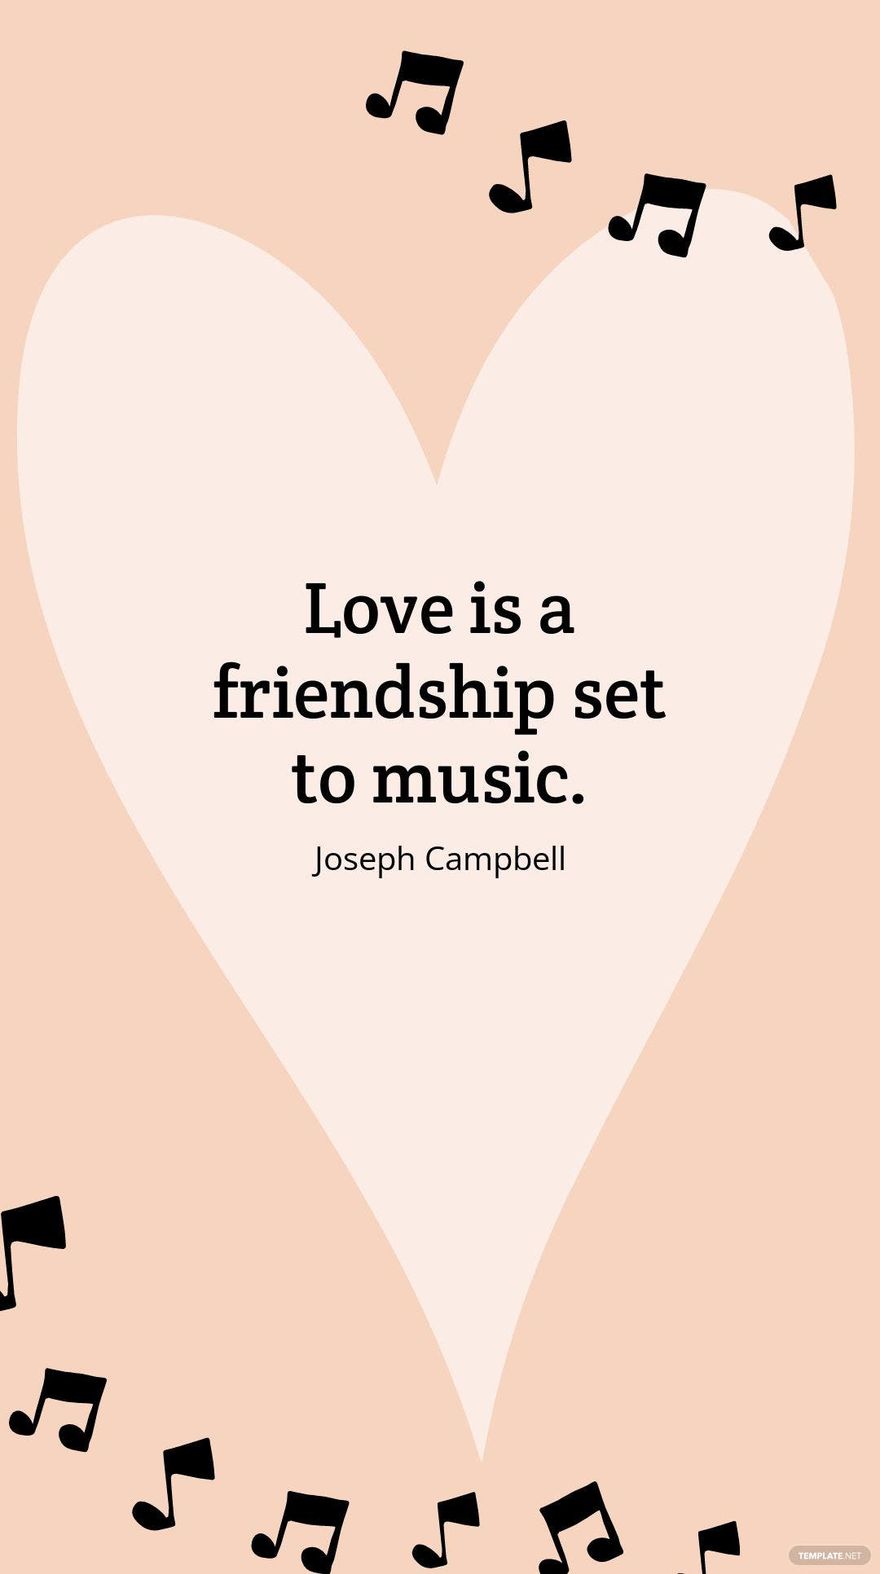 Joseph Campbell - “Love is a friendship set to music.”